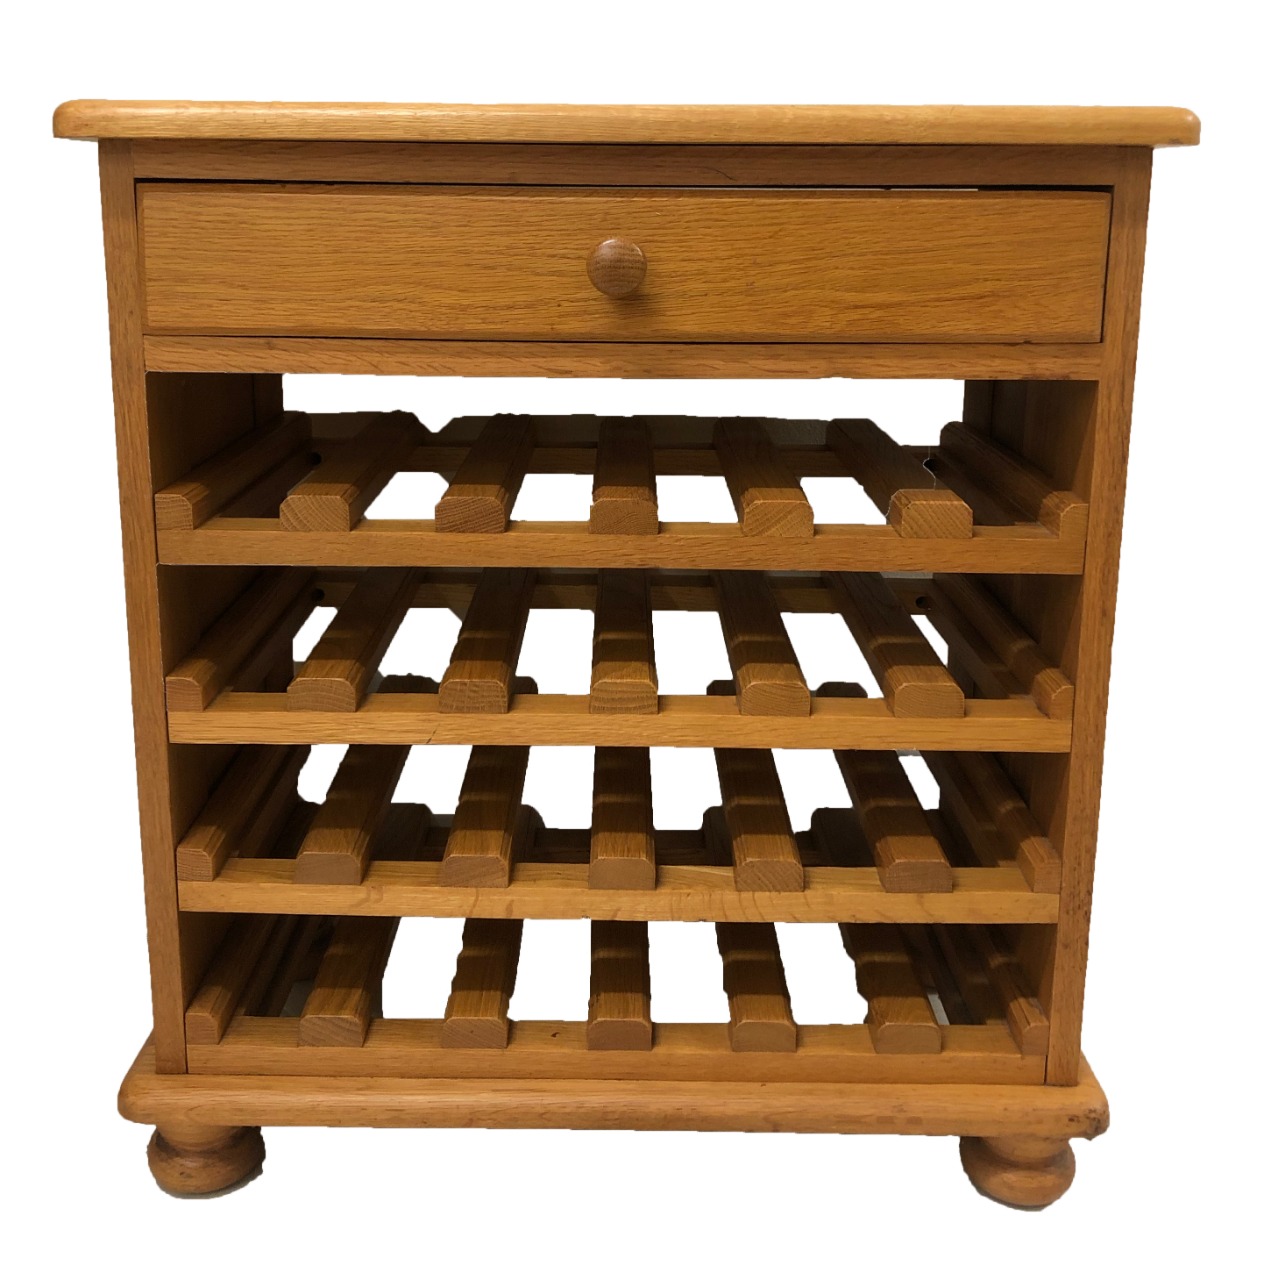 Wooden 24 Place Wine Rack for Sale!